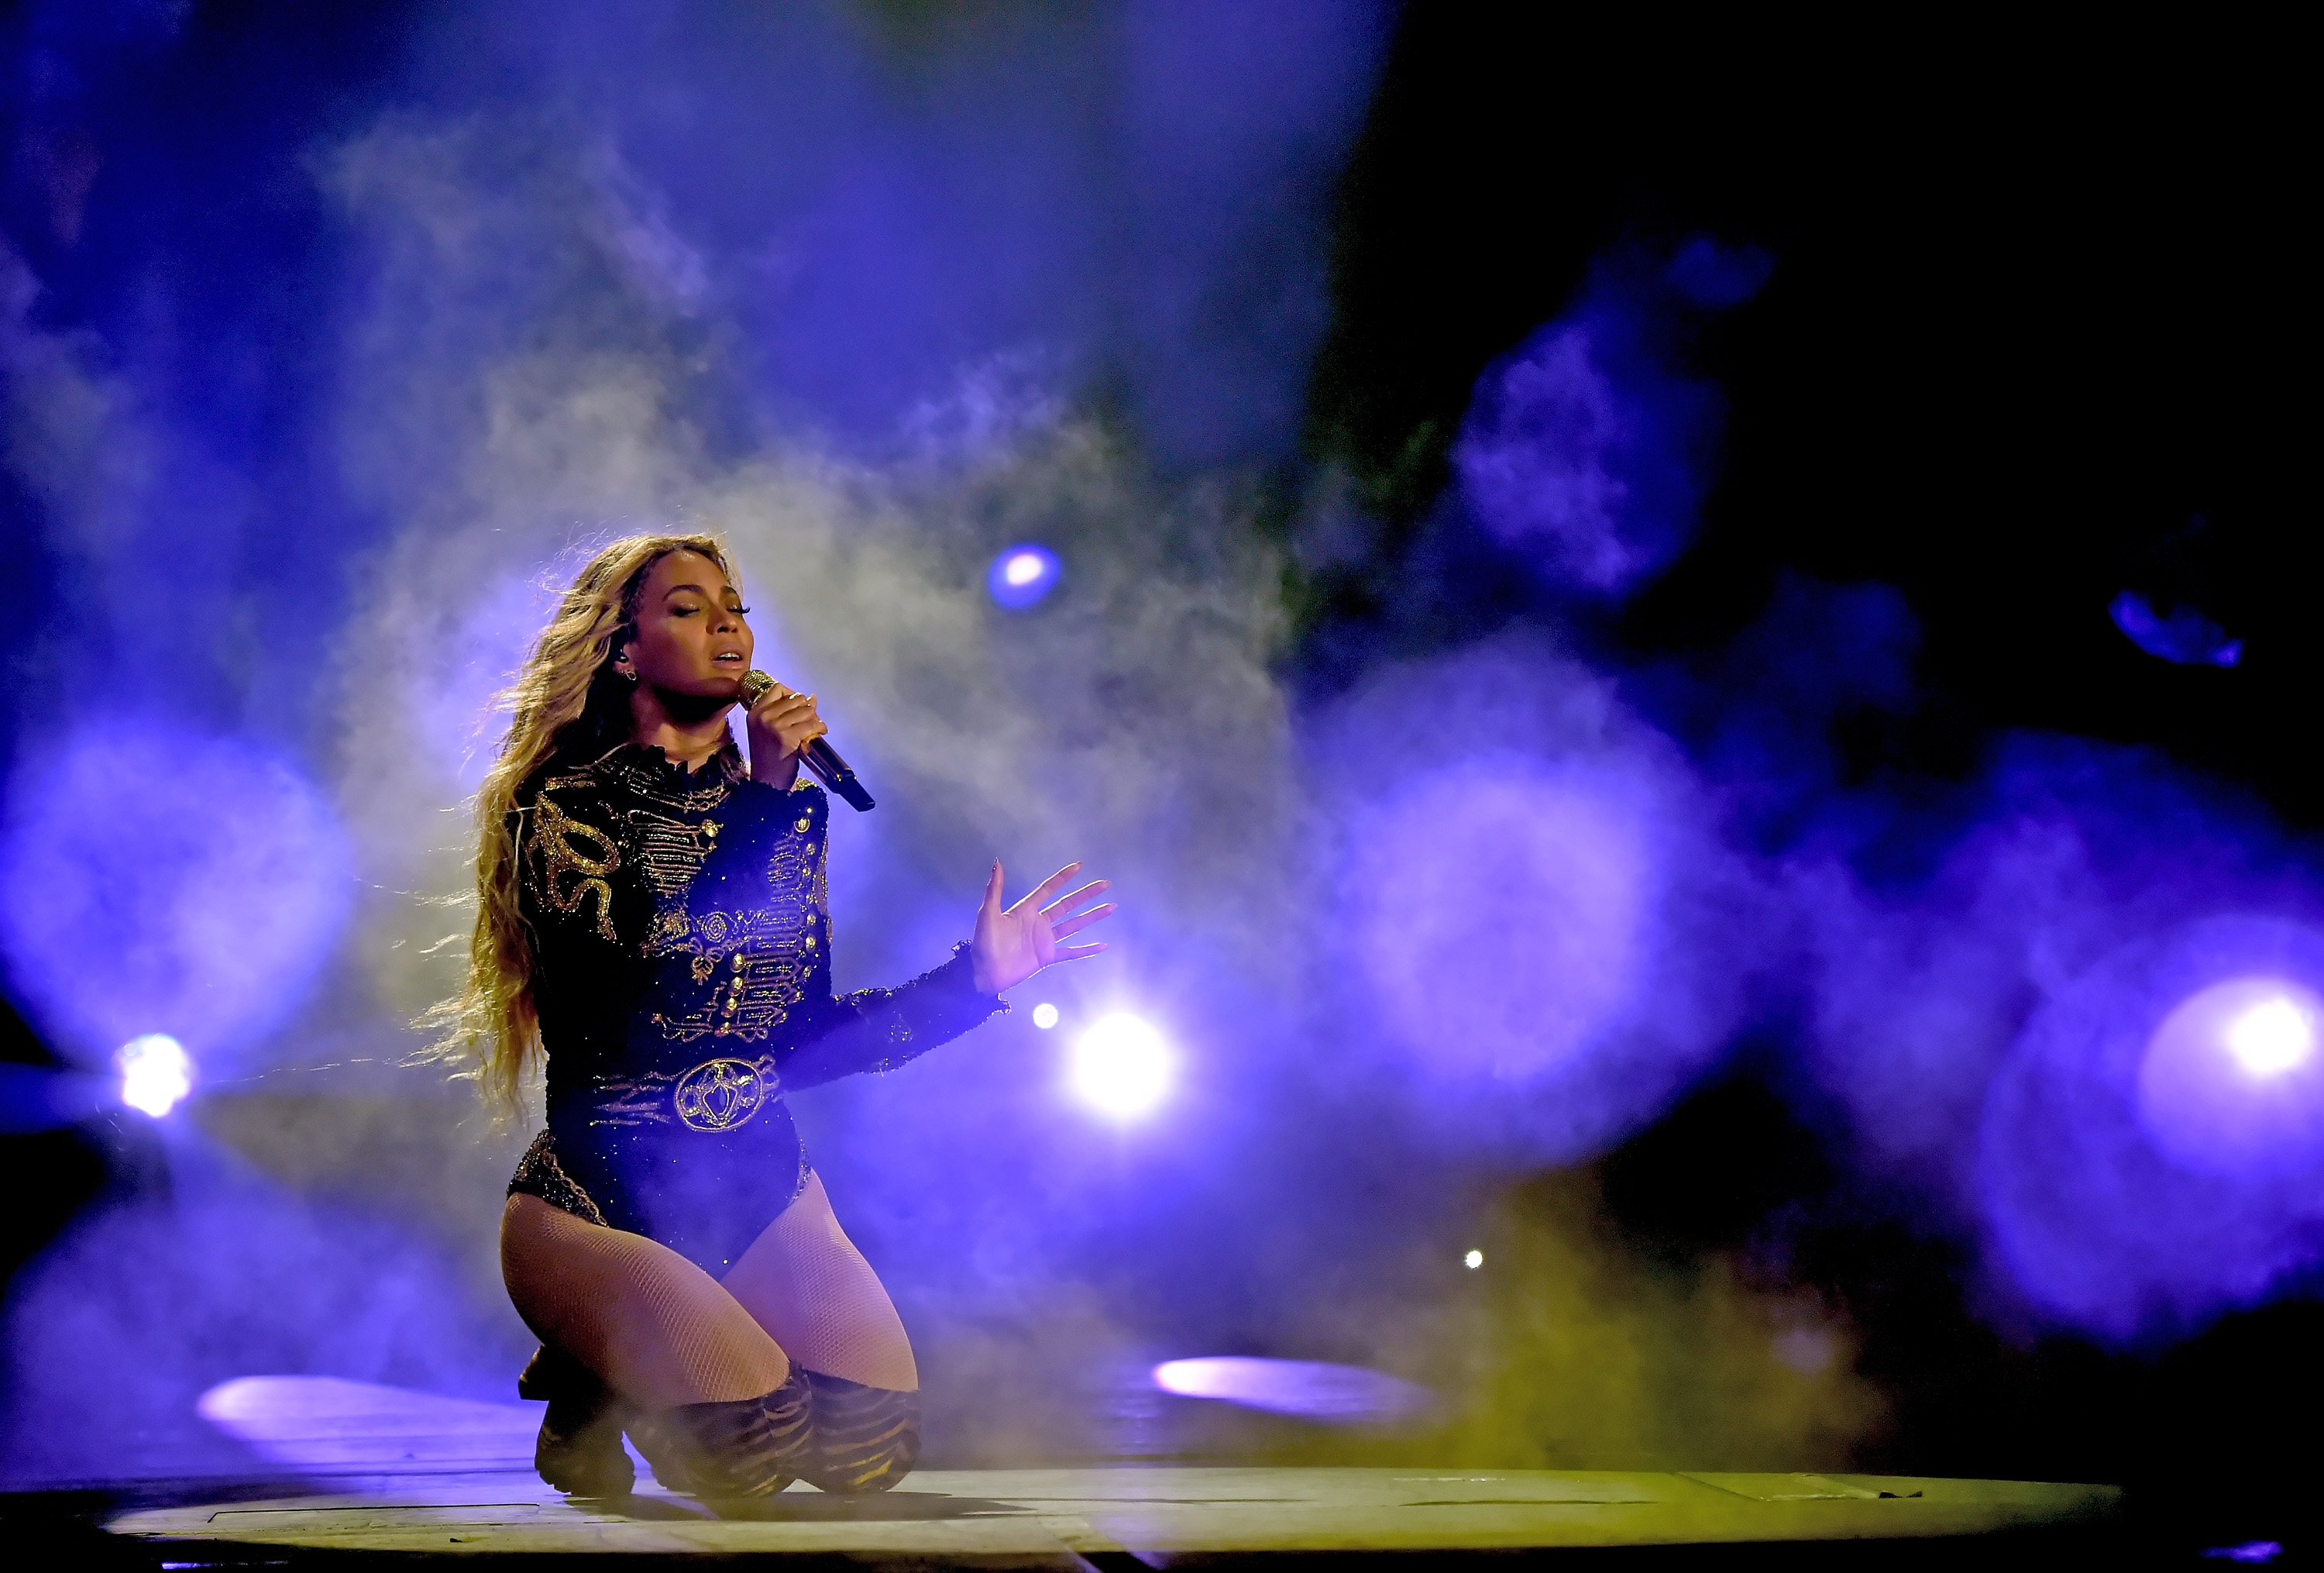 PASADENA, CA - MAY 14: Entertainer Beyonce performs onstage during "The Formation World Tour" at the Rose Bowl on May 14, 2016 in Pasadena, California. (Photo by Kevin Mazur/WireImage )